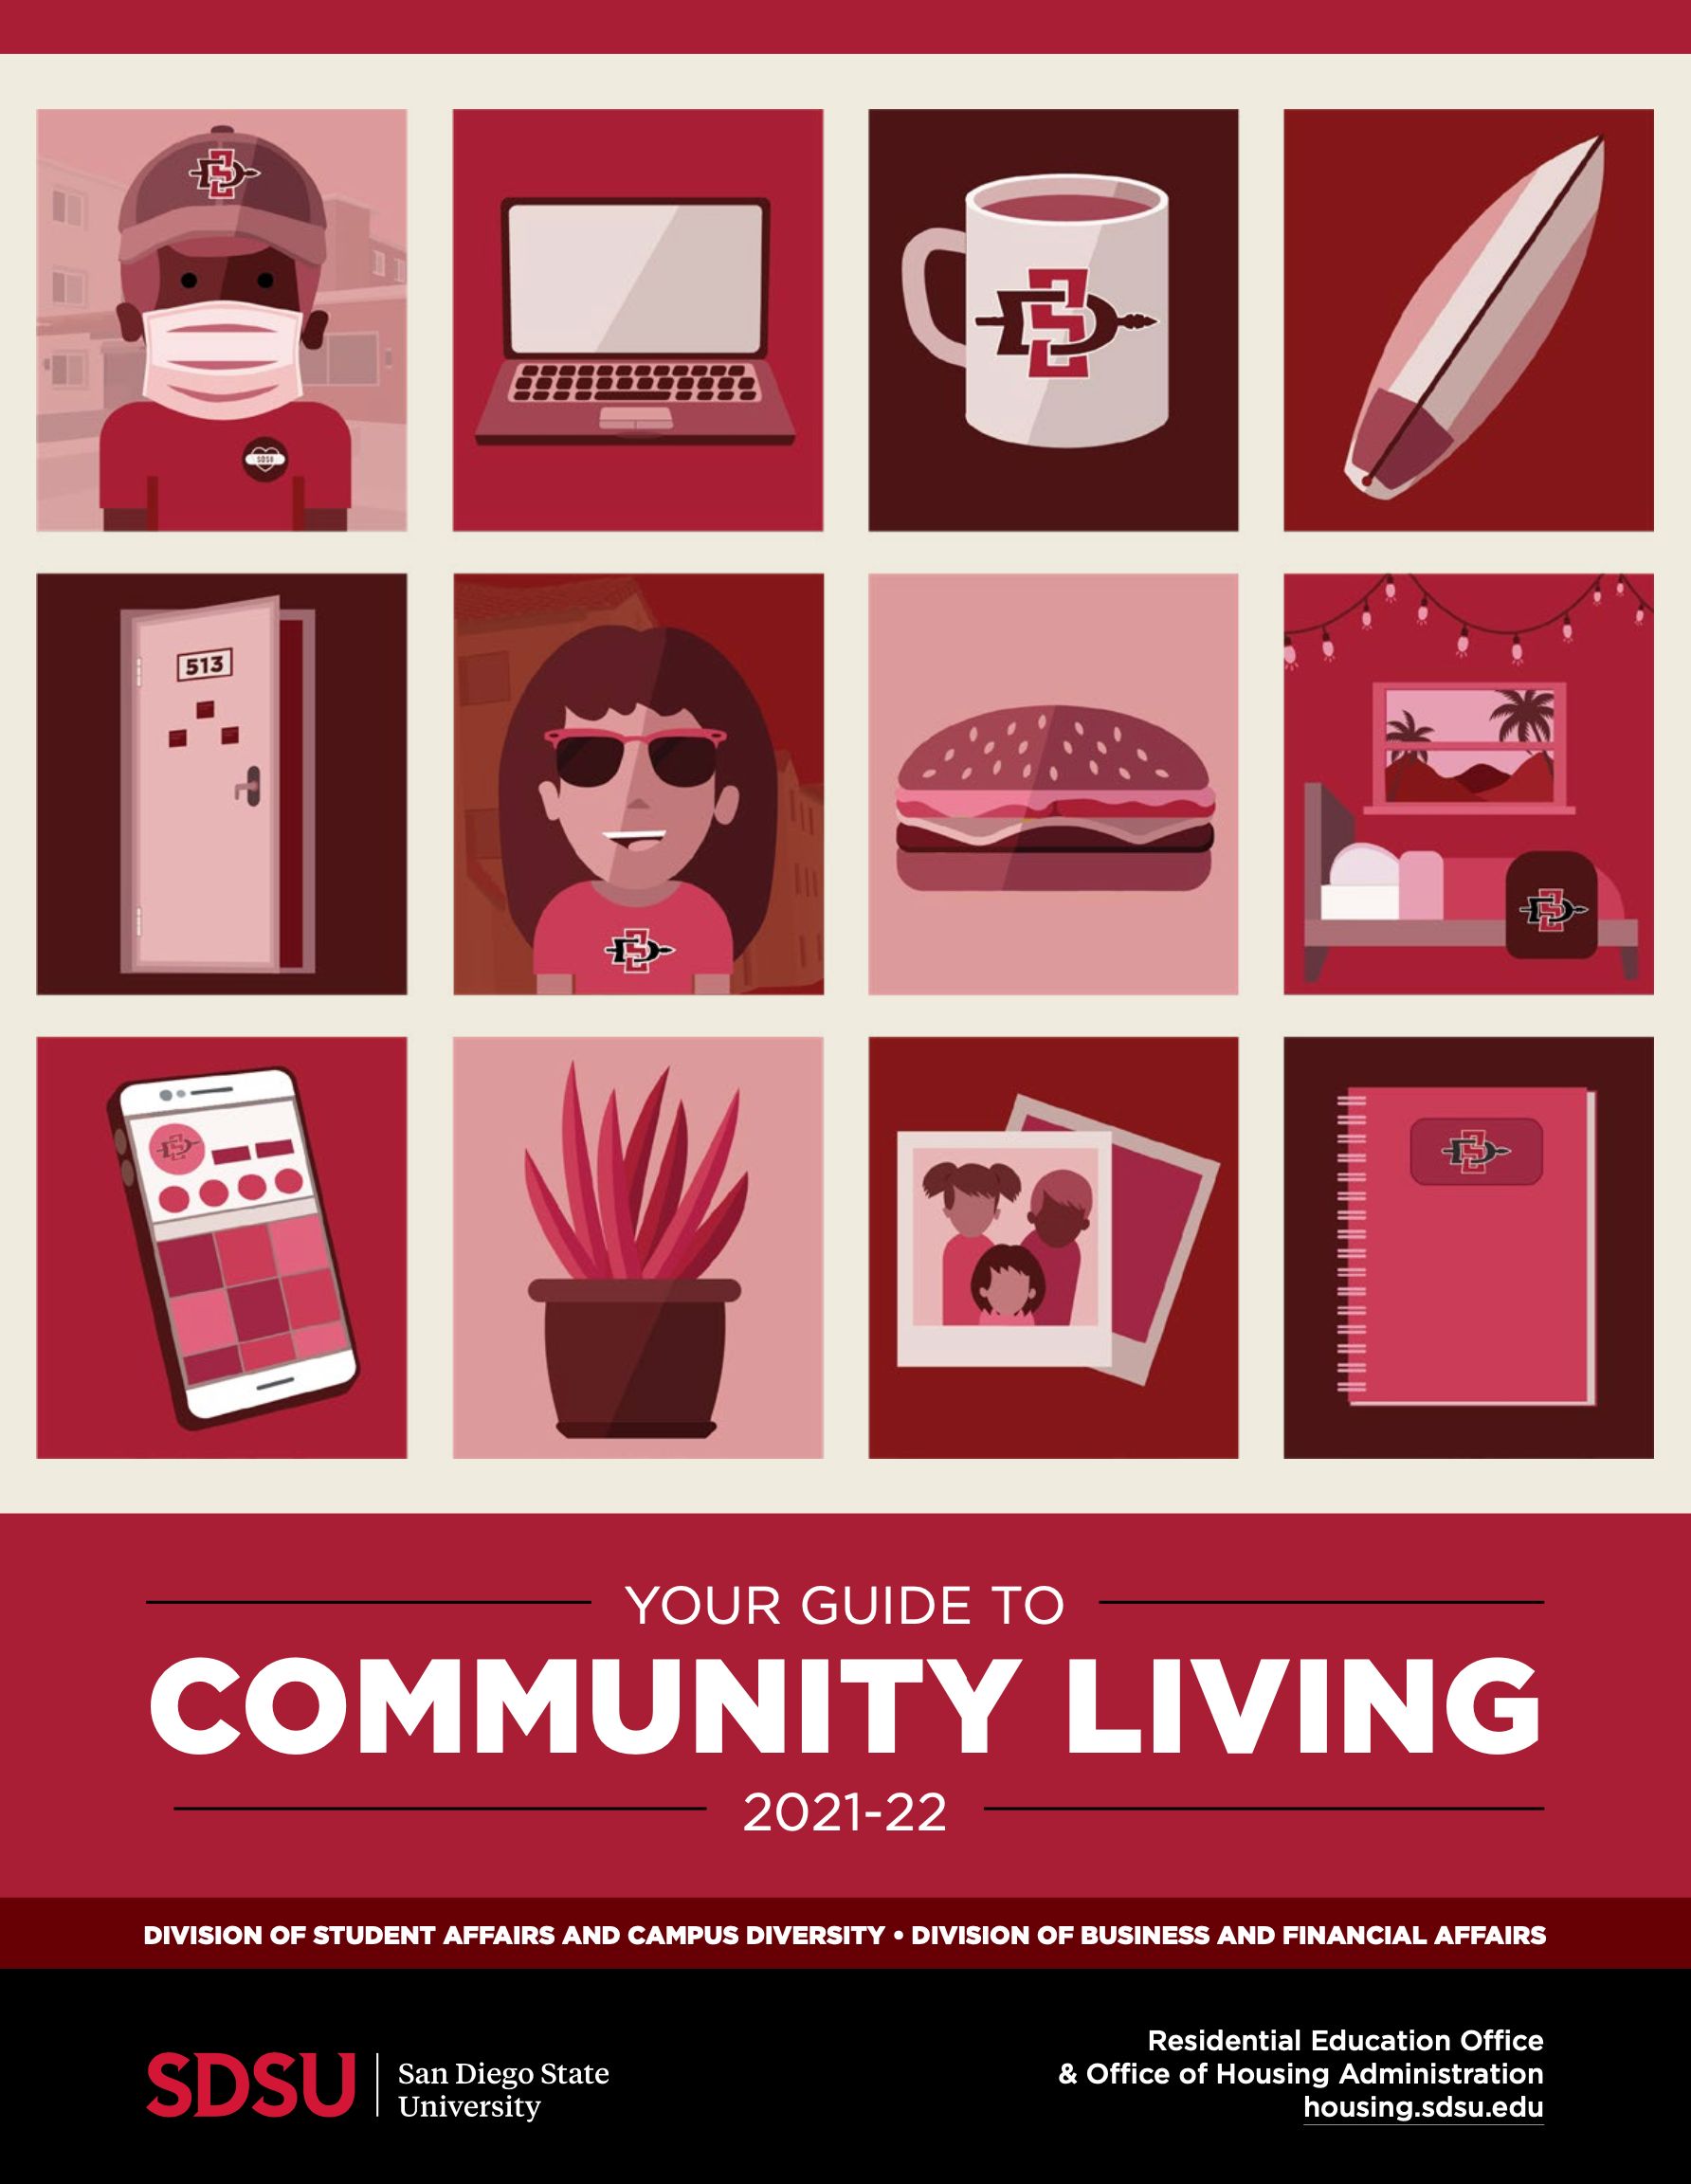 2021-22 guide to community living